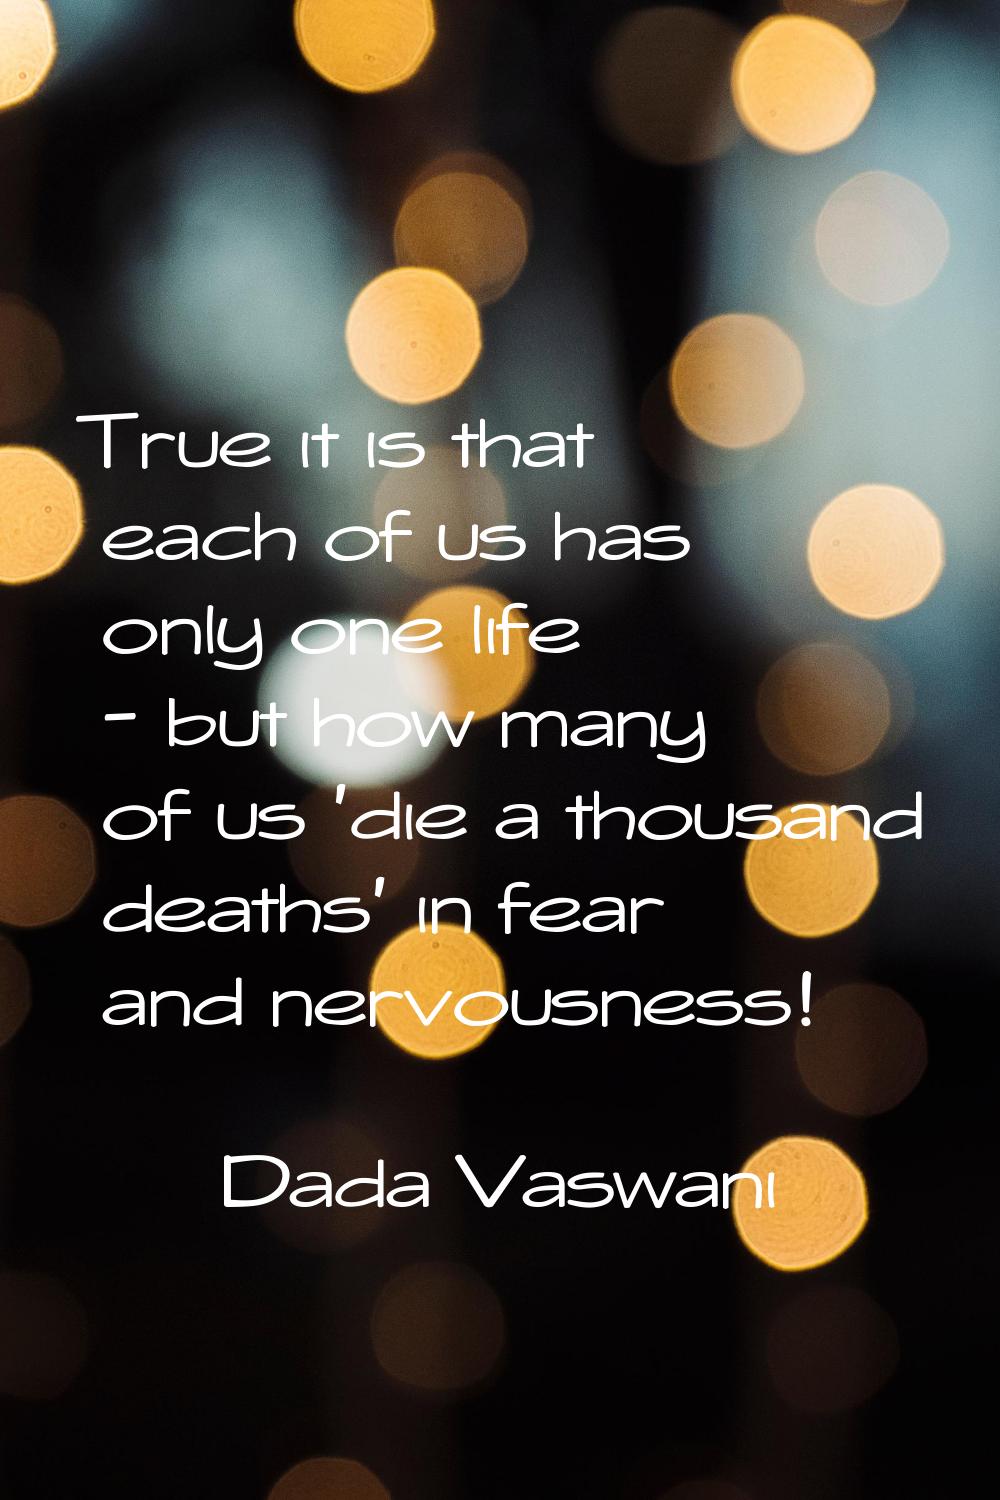 True it is that each of us has only one life - but how many of us 'die a thousand deaths' in fear a